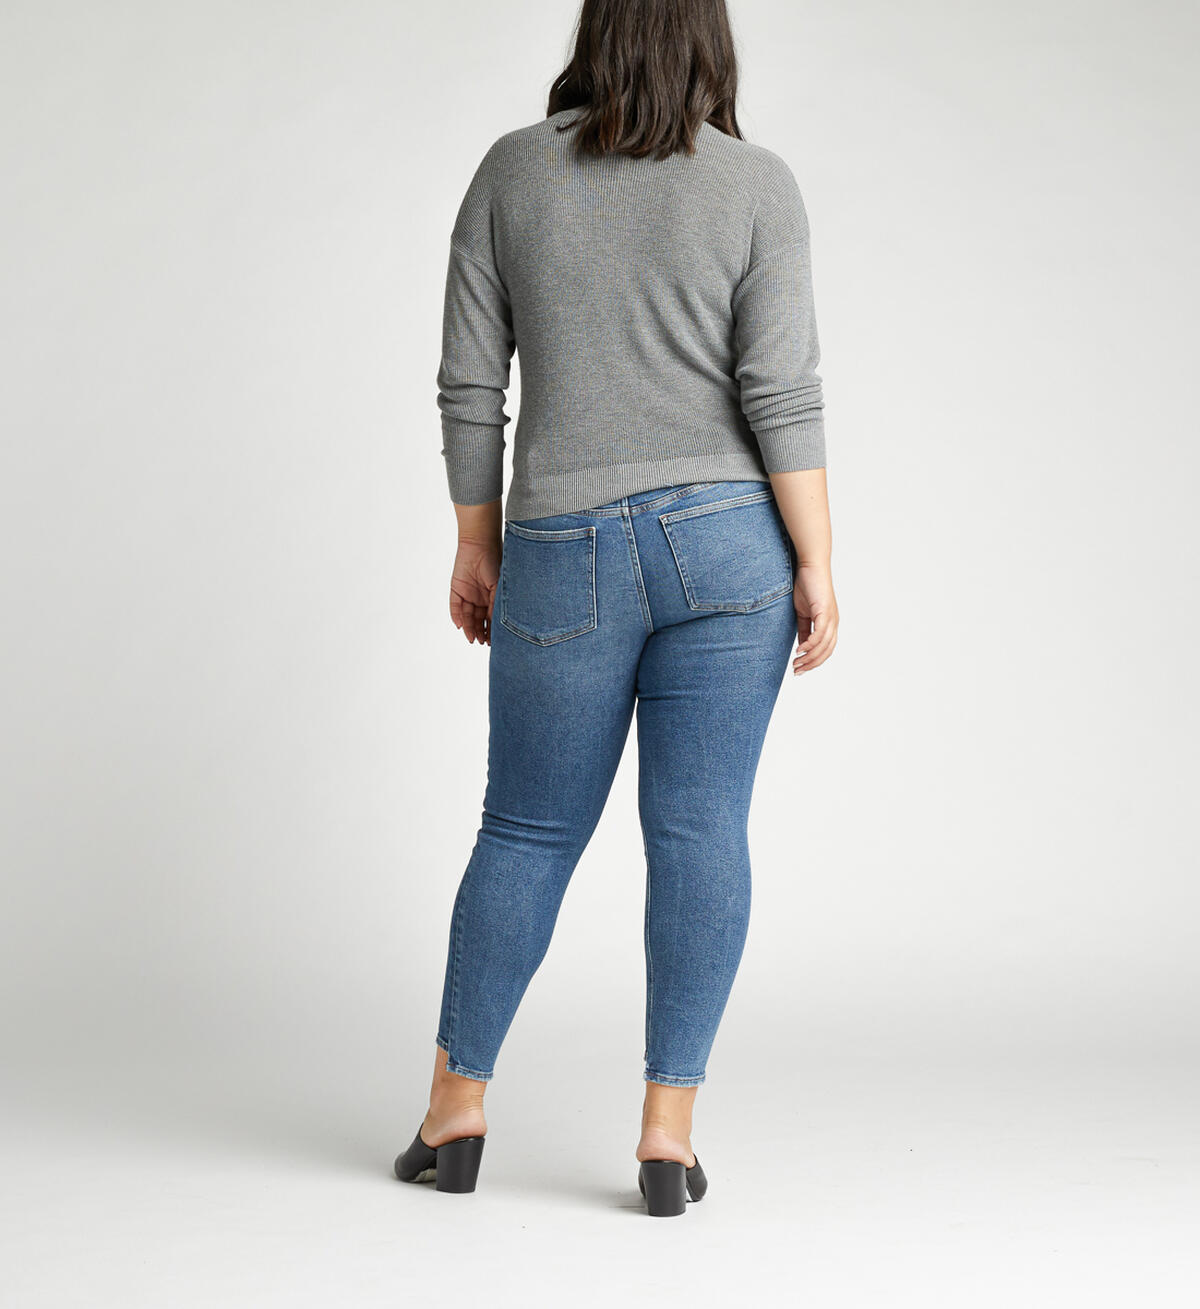 Most Wanted Mid Rise Skinny Plus Size Jeans, , hi-res image number 1